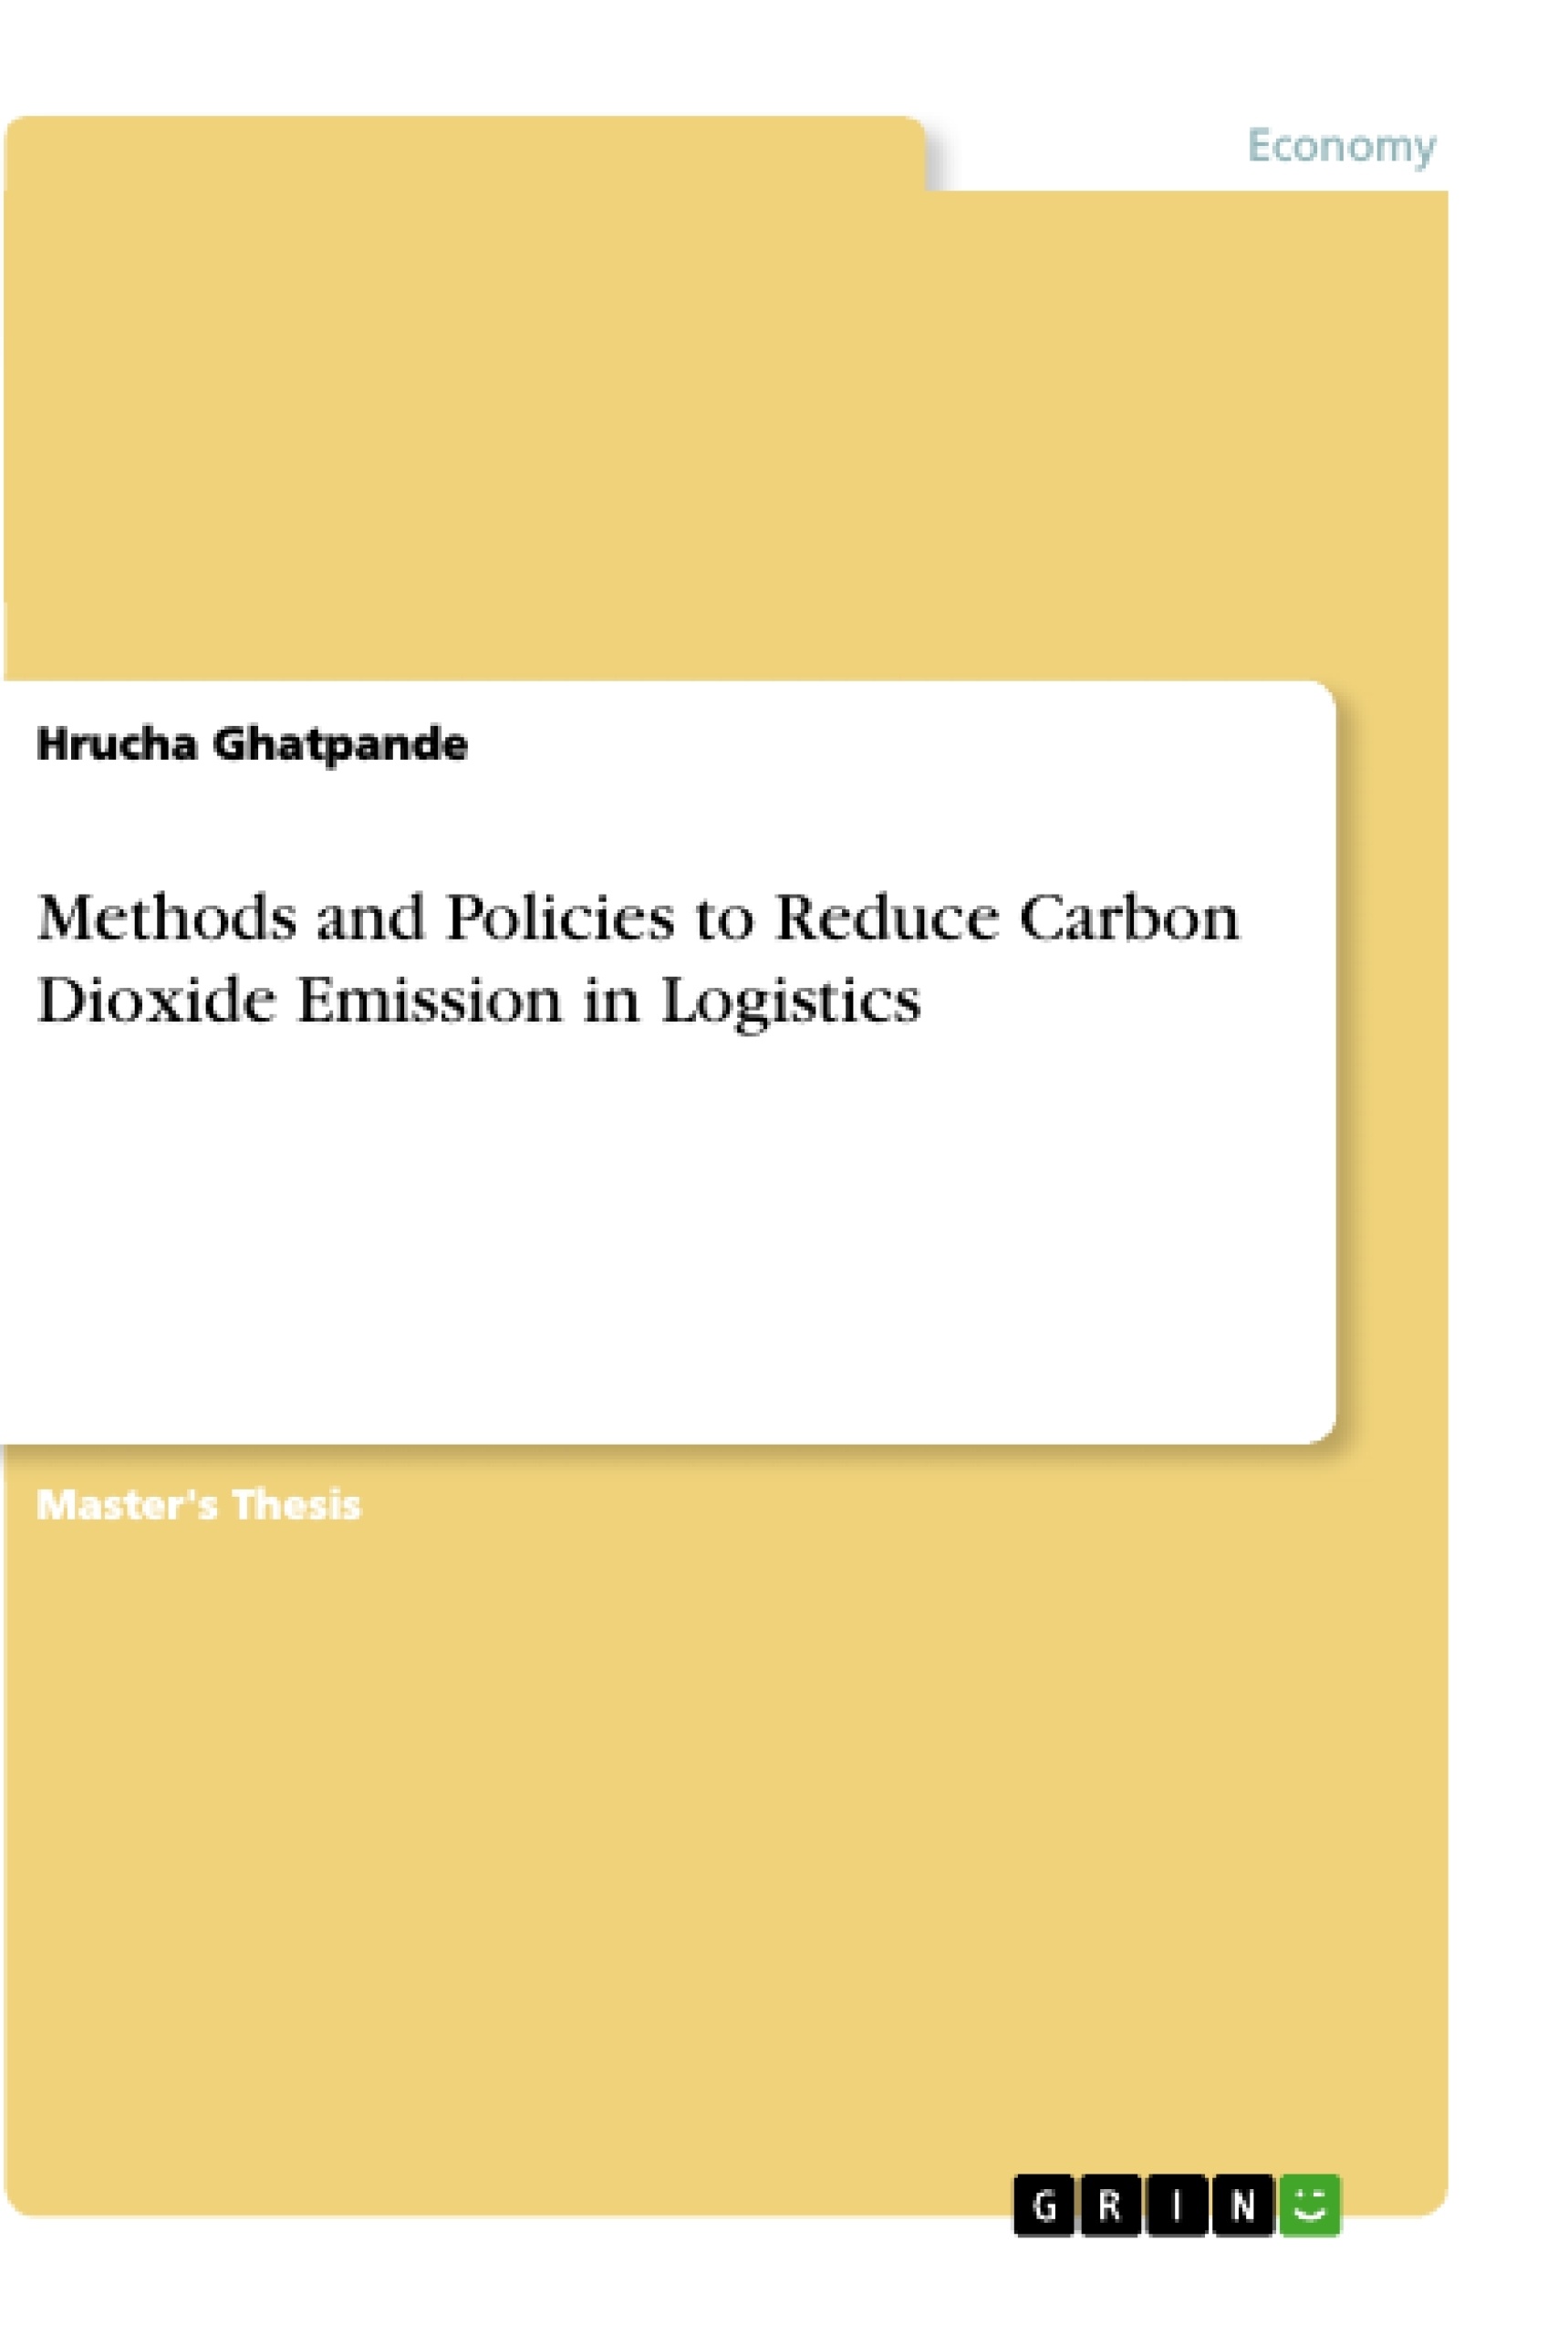 Title: Methods and Policies to Reduce Carbon Dioxide Emission in Logistics